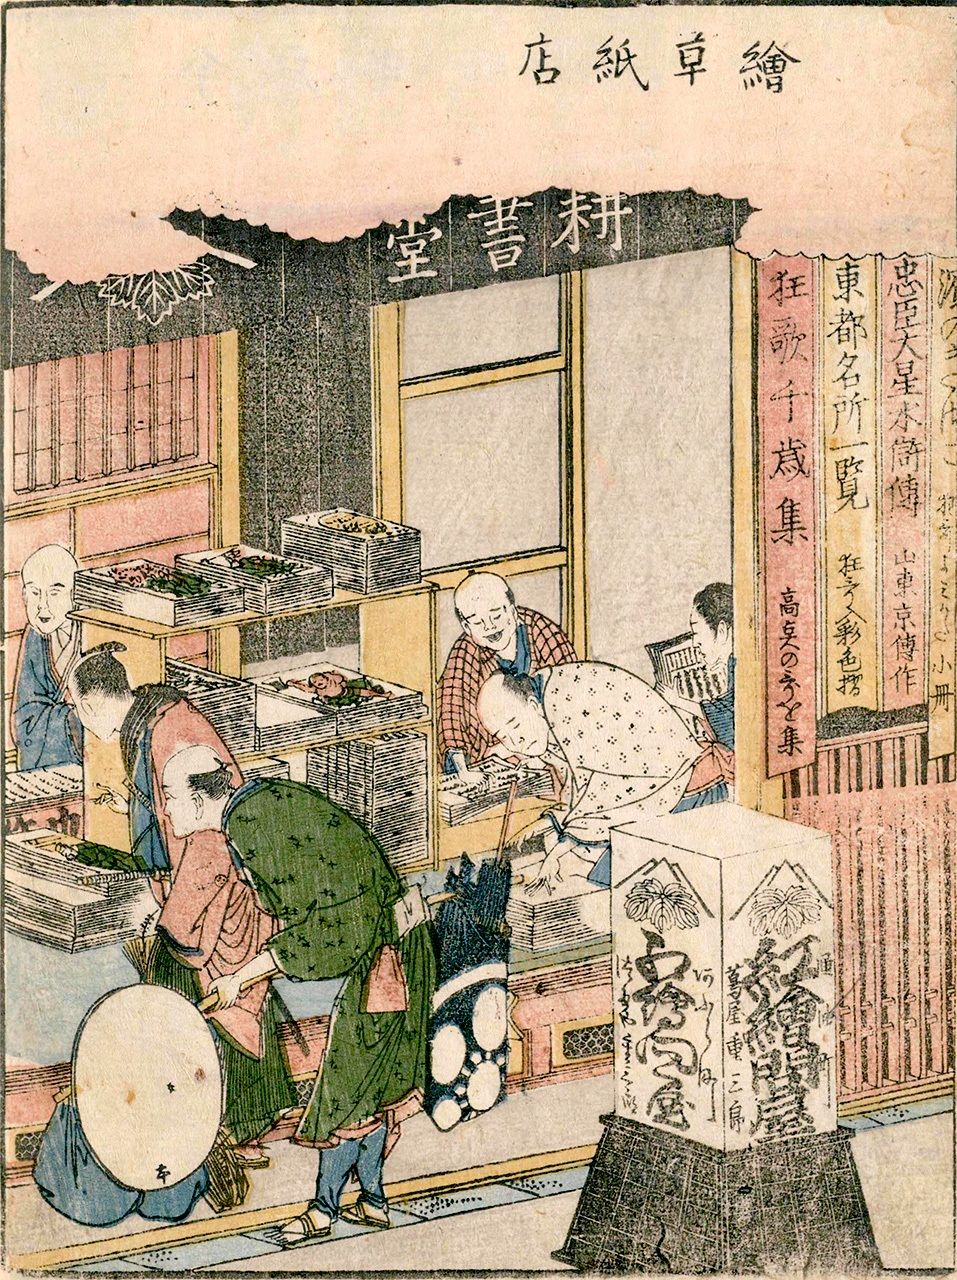 Kōshodō is included in Katsushika Hokusai’s Ehon azuma asobi (Picture Book of Edo Amusements). The work was published in 1802 and is thought to depict the store after Tsutaya’s death. (Courtesy the National Diet Library)